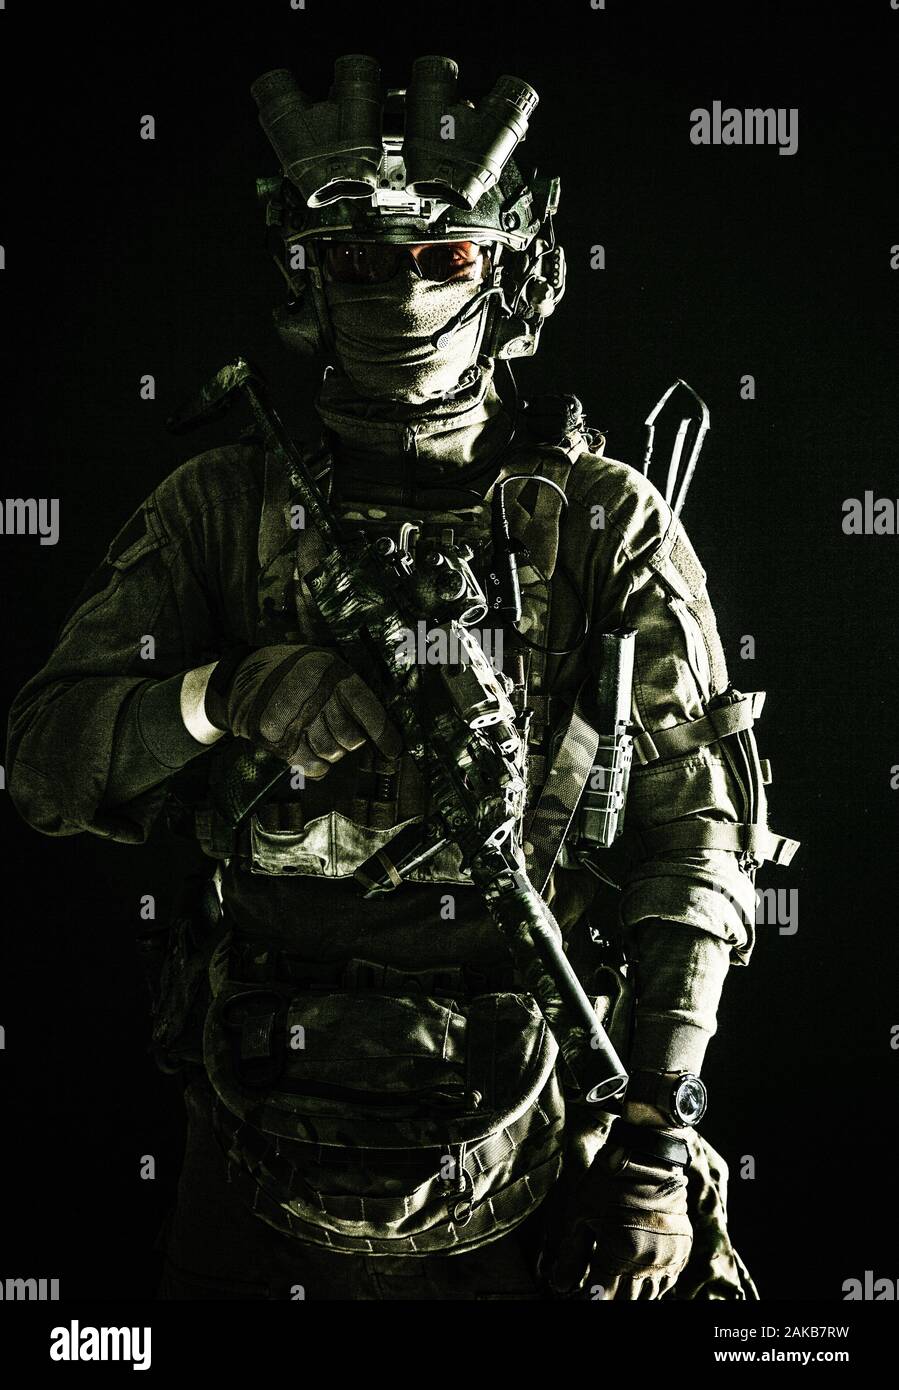 Army elite troops serviceman standing in darkness Stock Photo